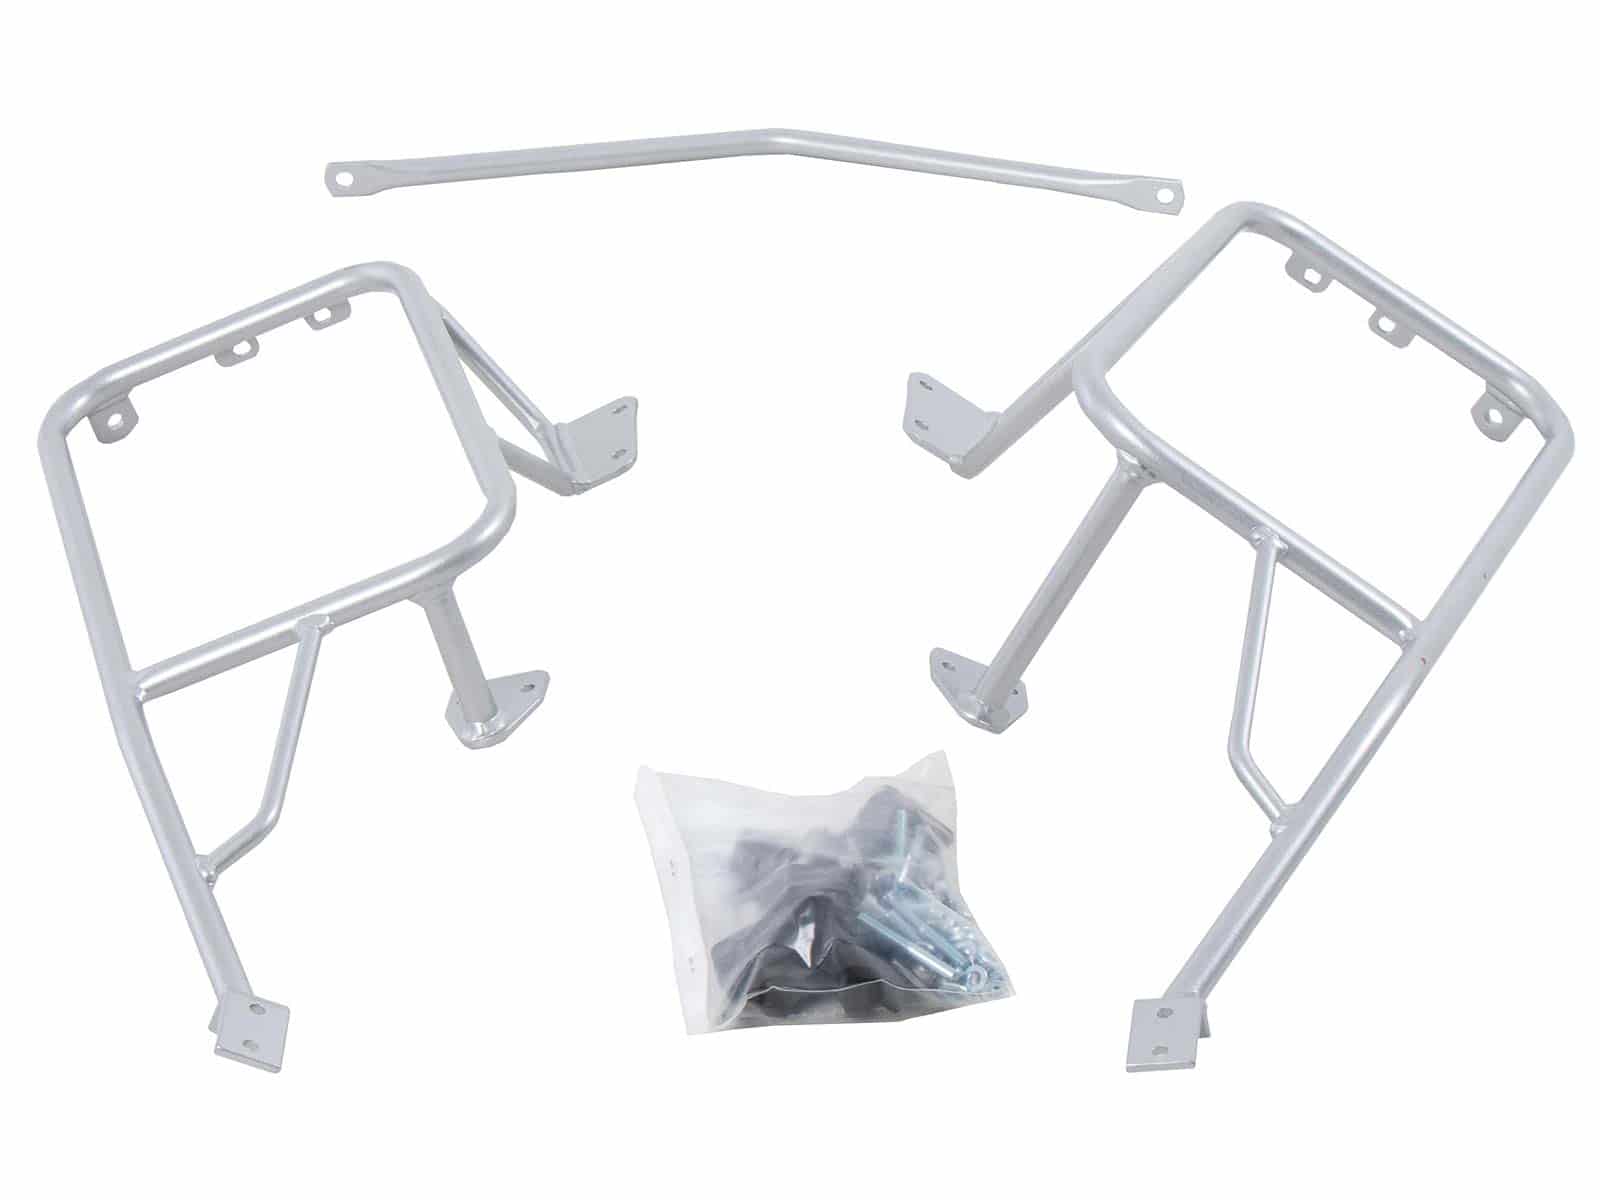 Sidecarrier permanent mounted silver for BMW R 1200 GS Adventure (2006-2013)